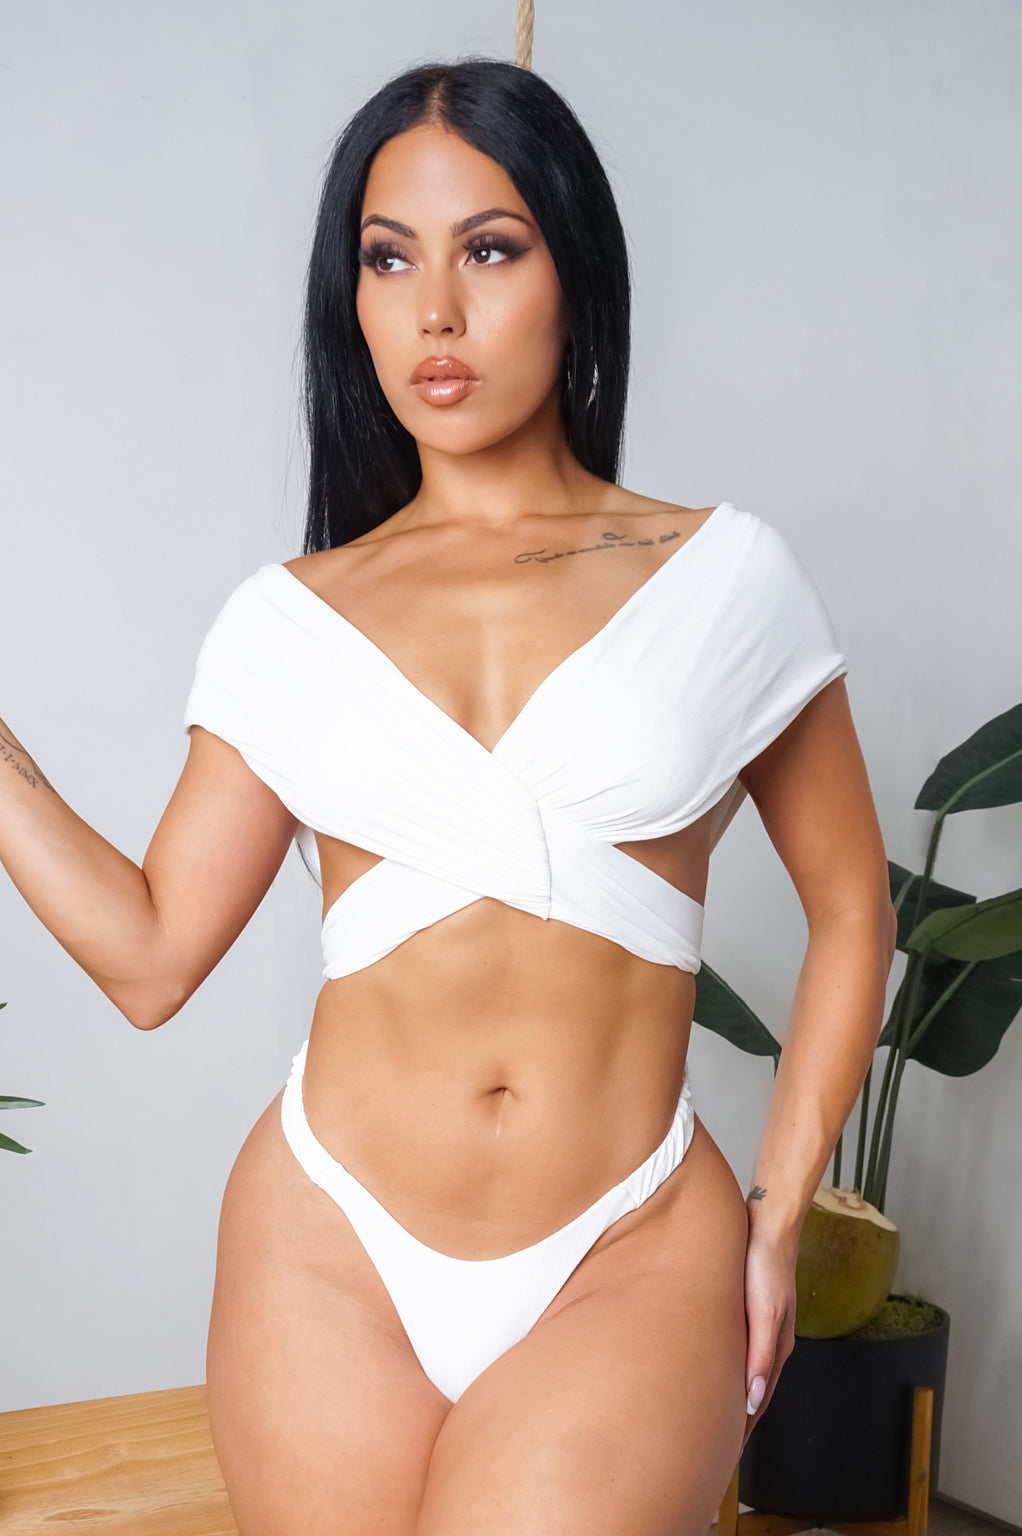 All In One Piece Swimsuit - White